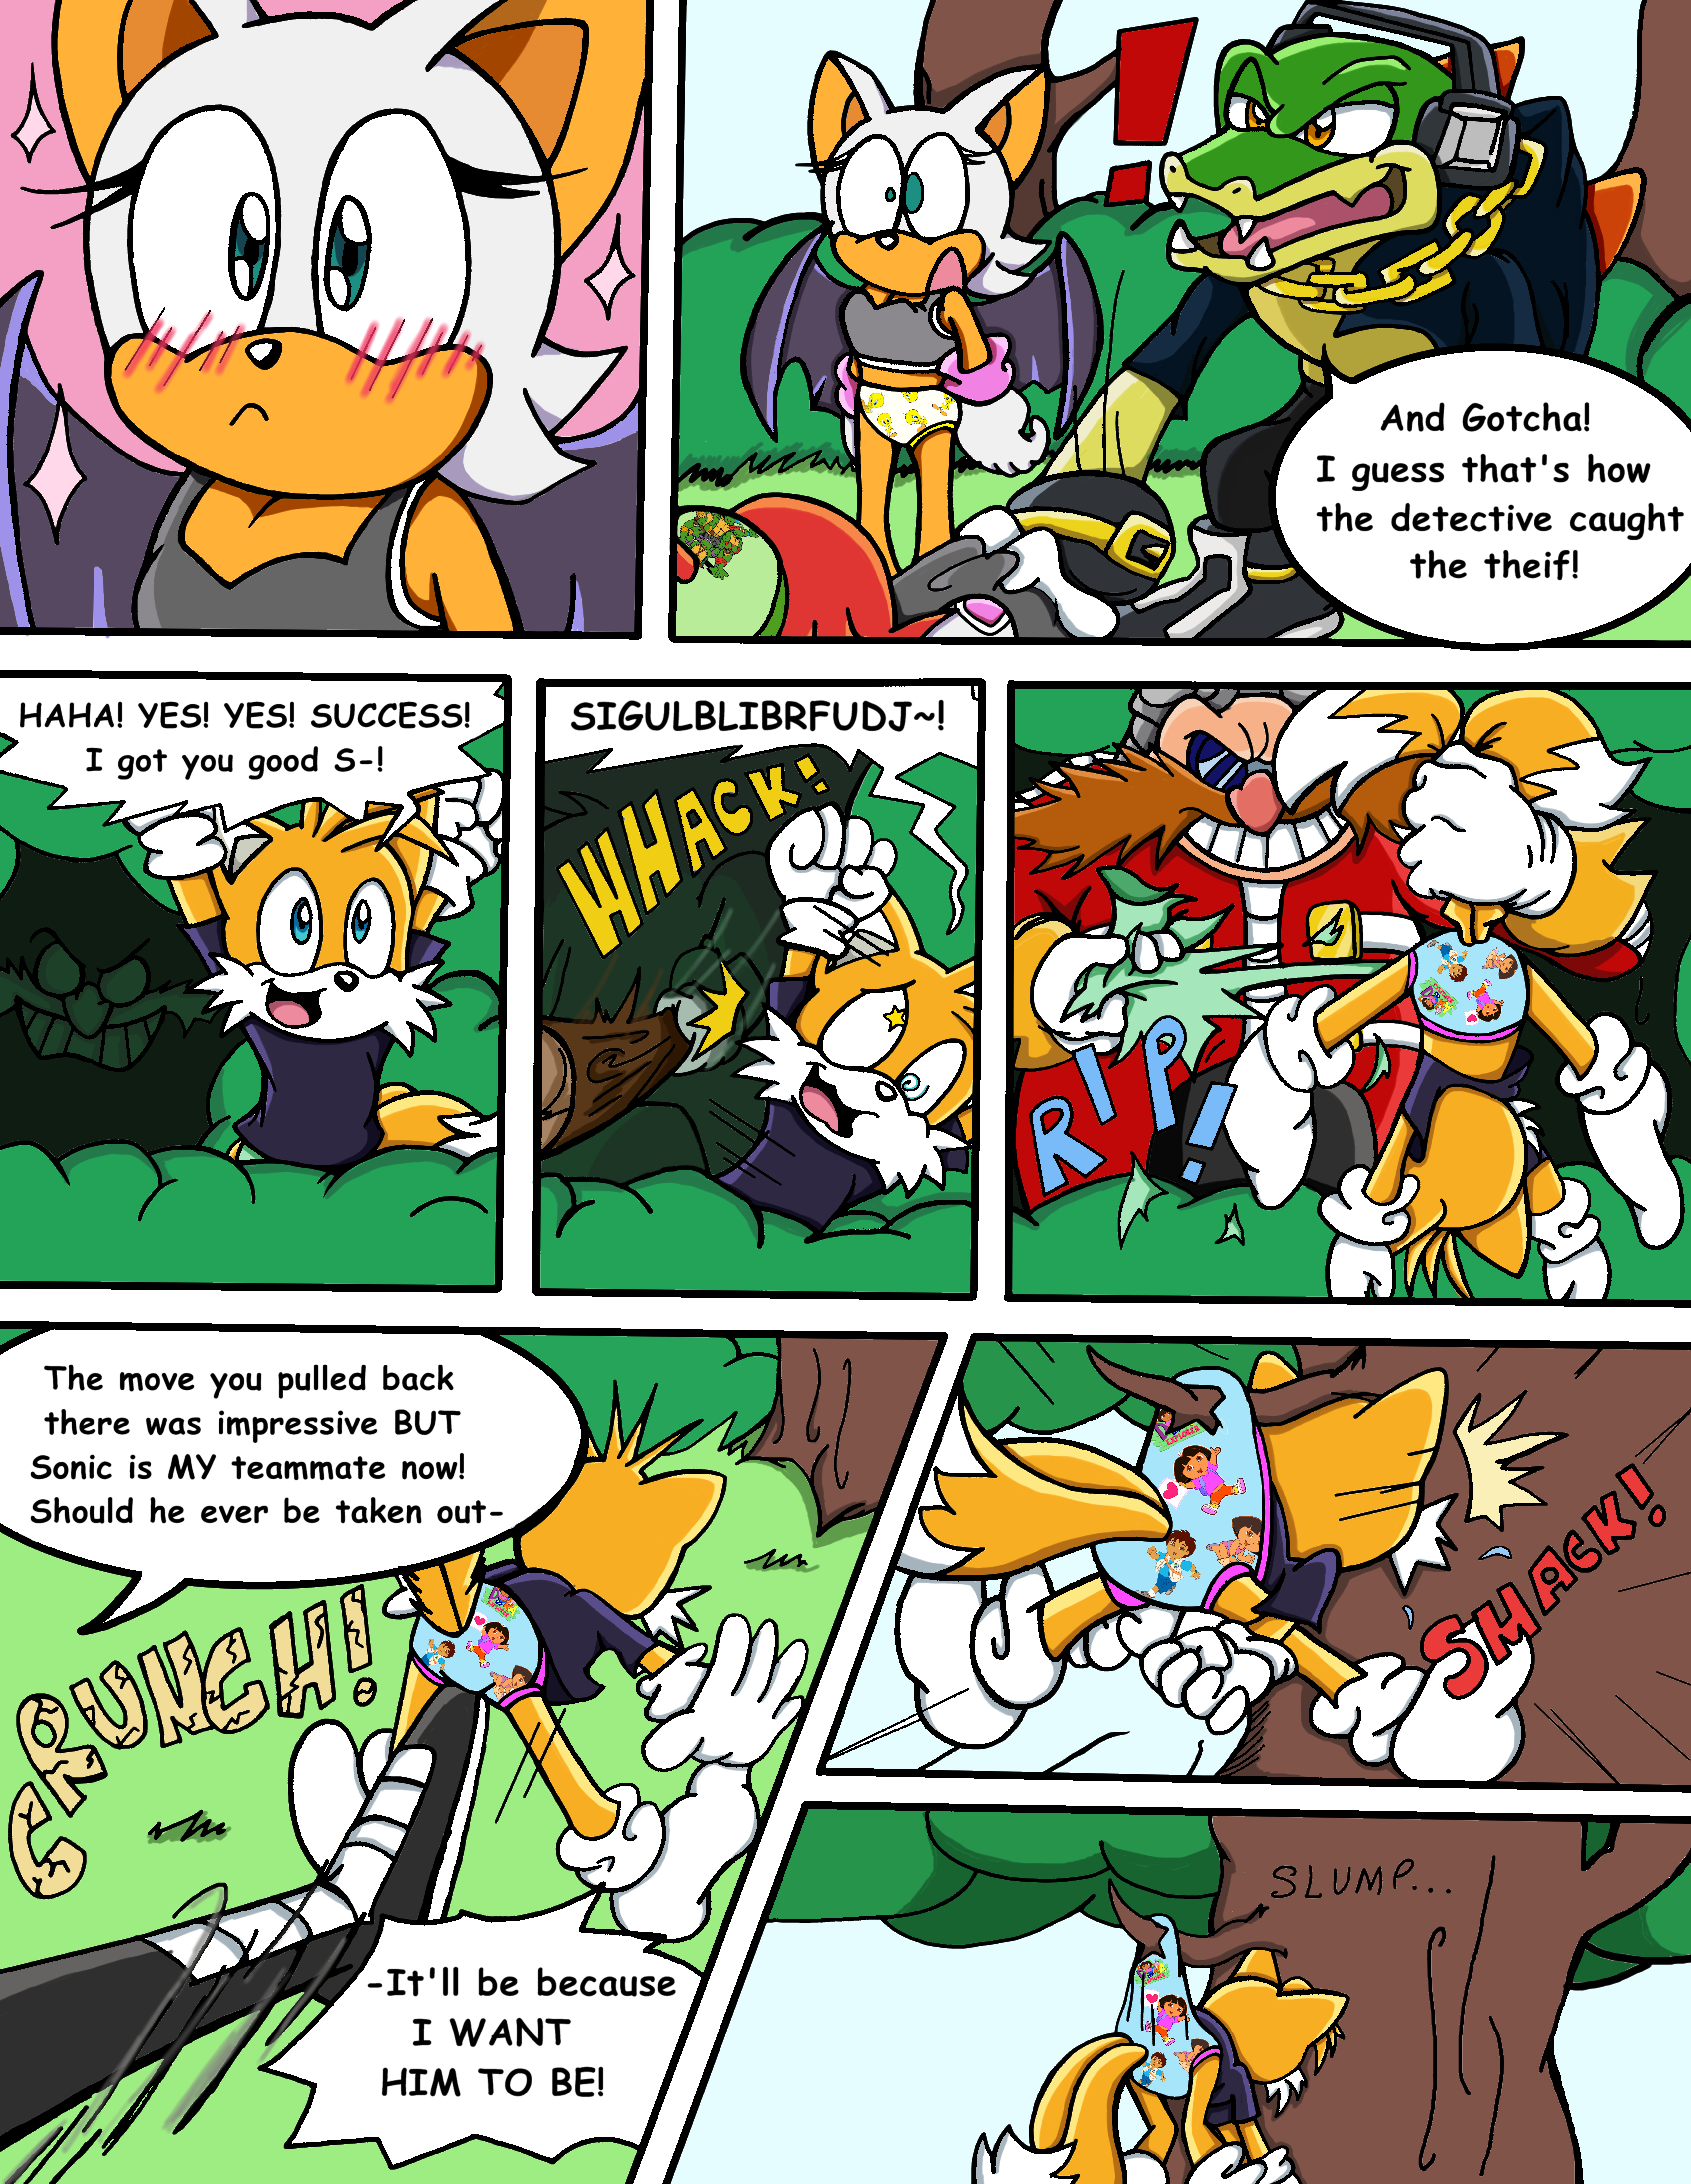 Two babies one fox на русском. Sonic in diaper комиксы. Sonic Tails in diaper. Эми Роуз diaper. Sonic Tails in diaper Comics.